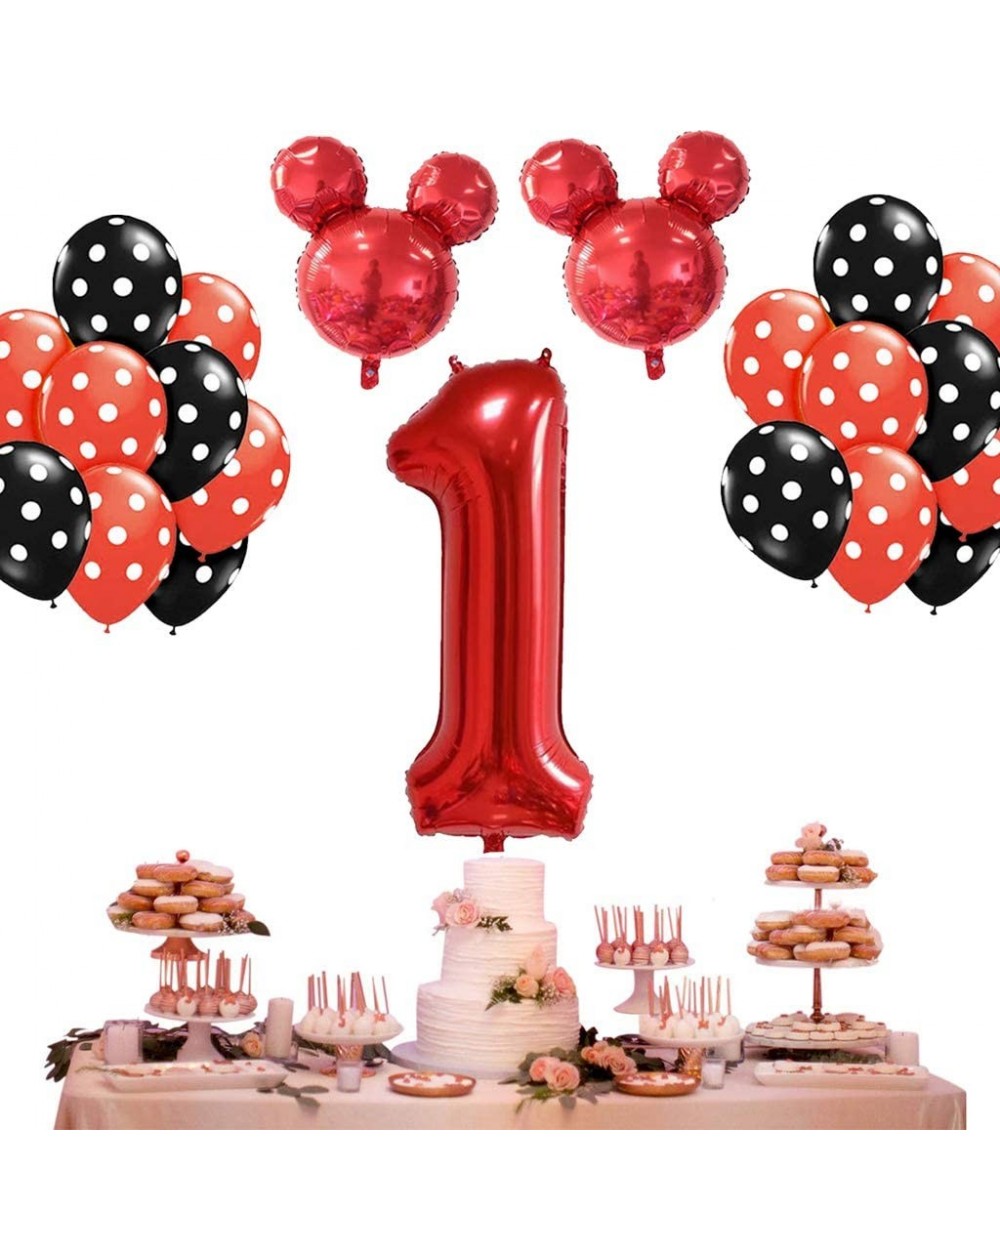 Balloons 13Pcs 1st Birthday Balloon Decorations- Balloon 1th Red Mouse Head Balloons and Red Black Wave Point Balloons for Cr...